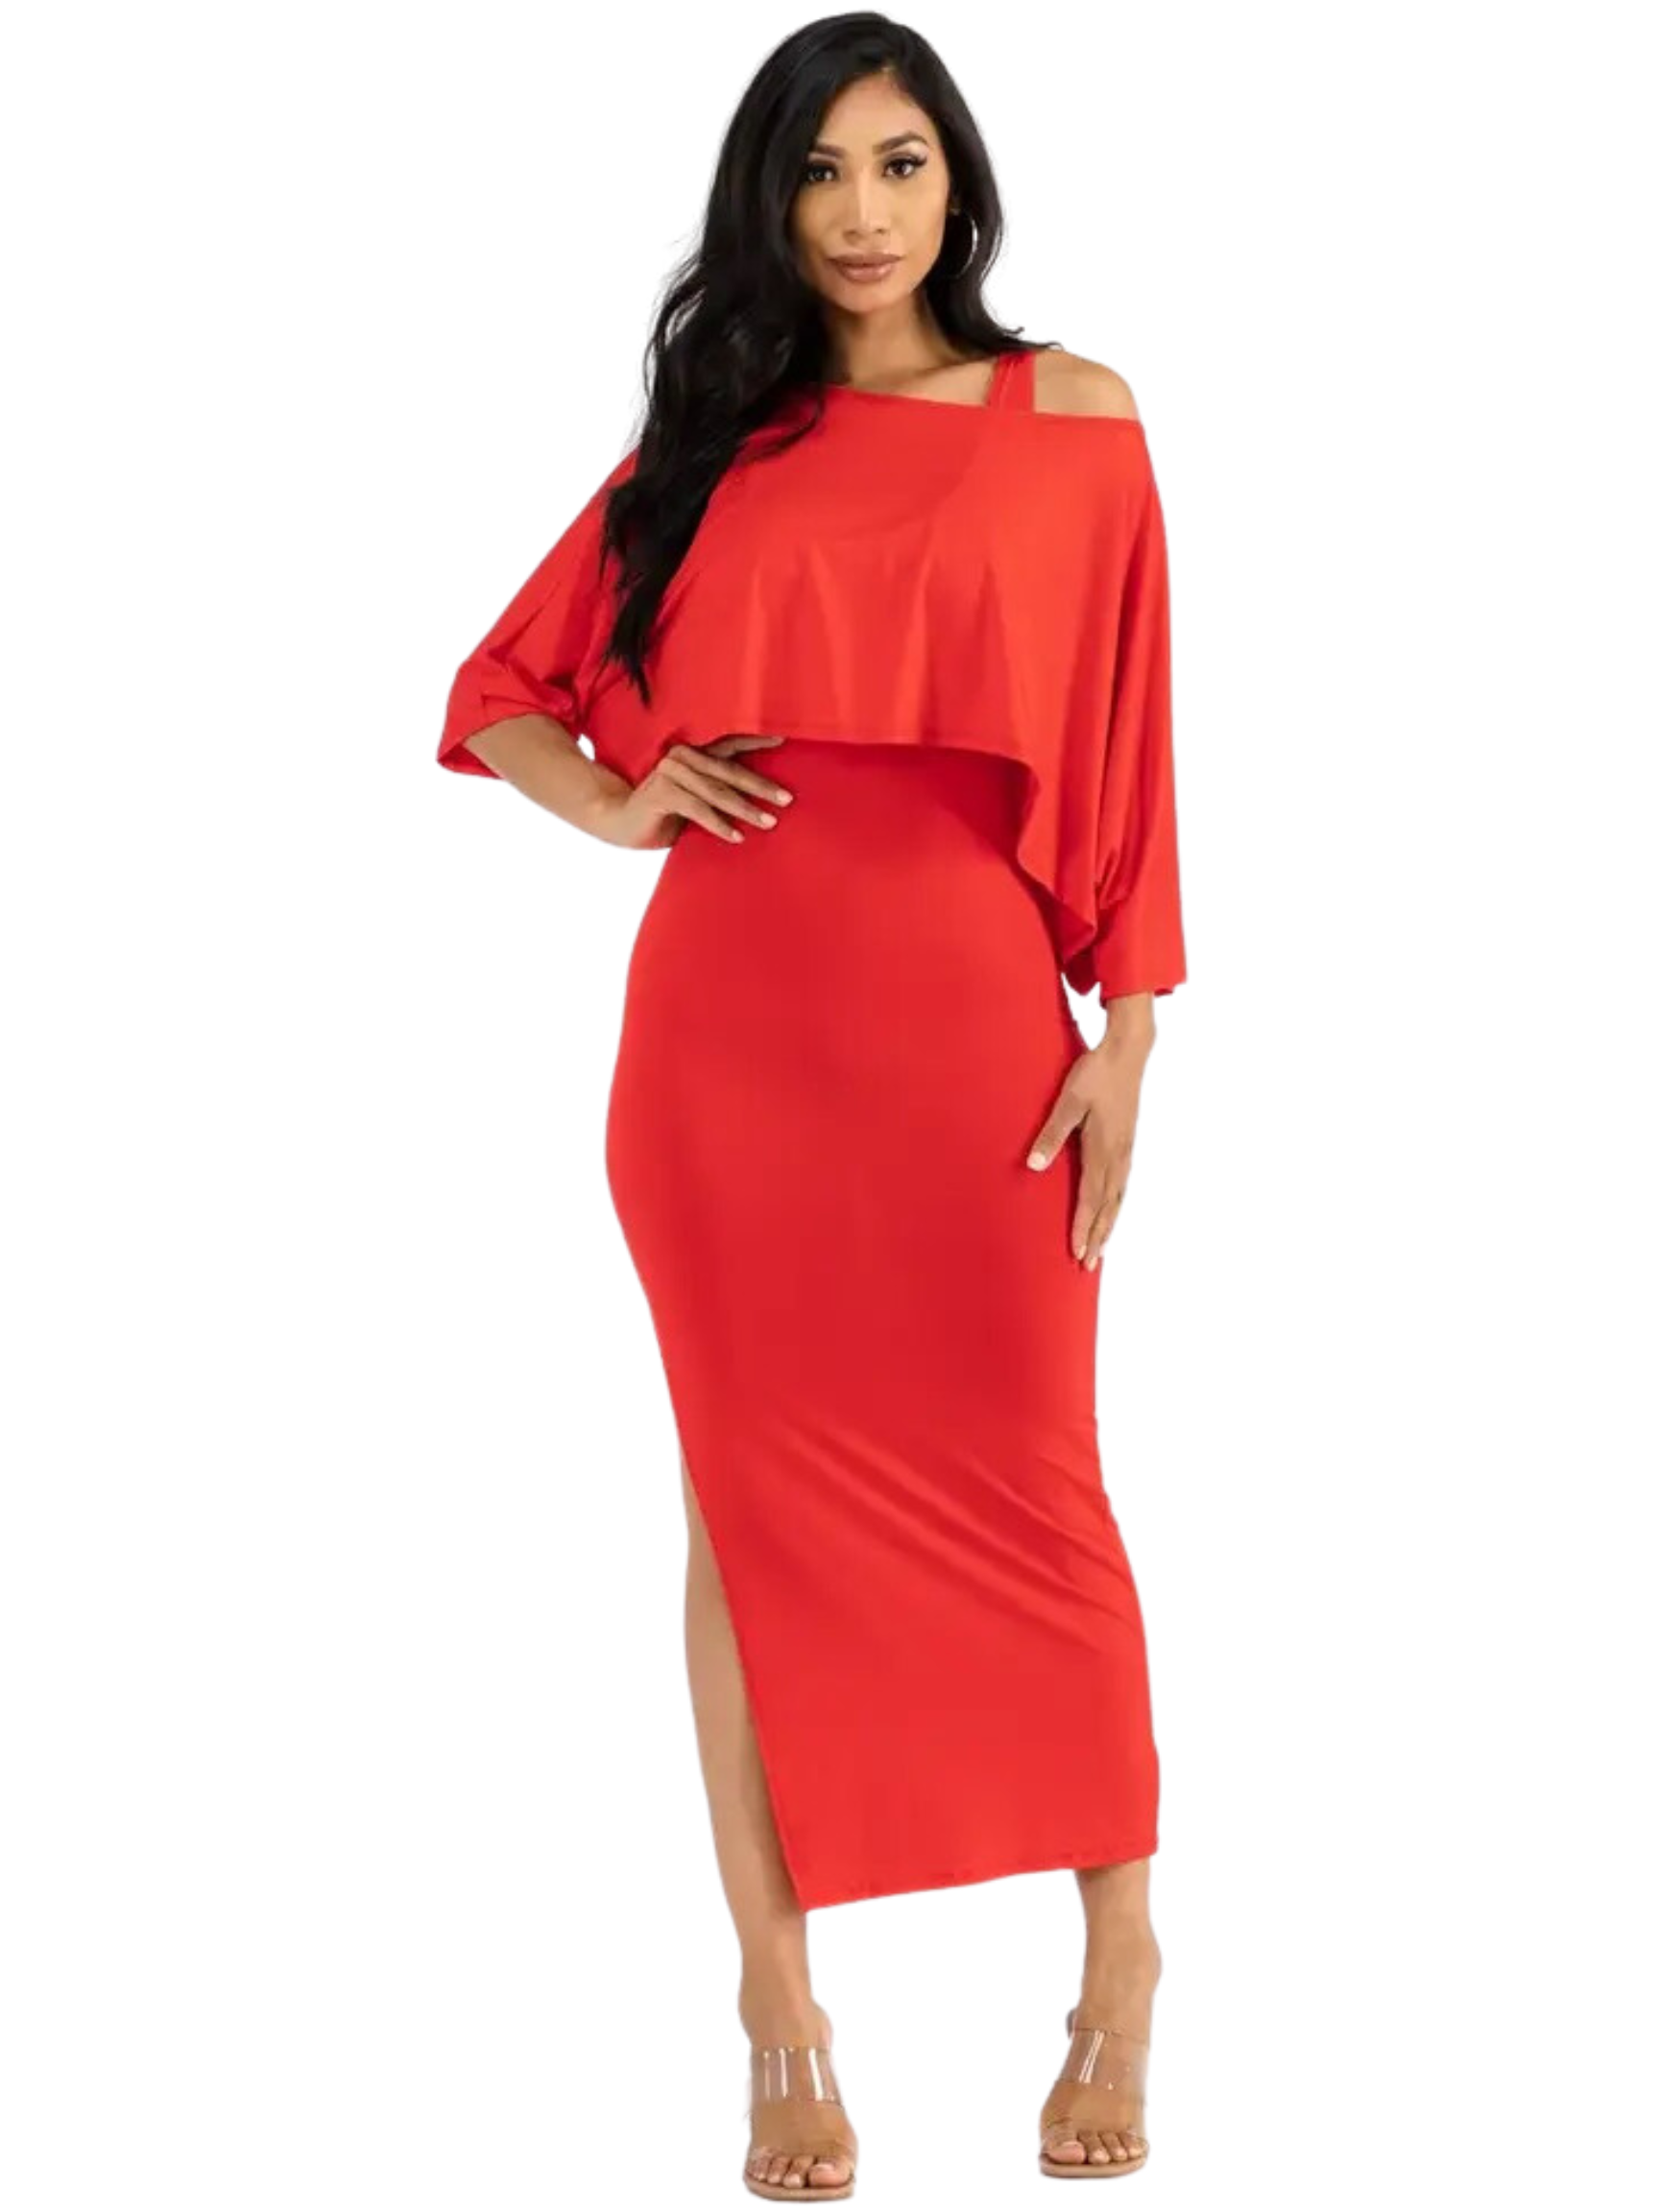 Weezie D Stretch Cayenne Red Double Layer Maxi Dress. Comes with removeable short sleeve top that turns into a tank dress if you desire. Slay this dress at dinner or birthday parties or girls night out. Cute comfortable style all in one.